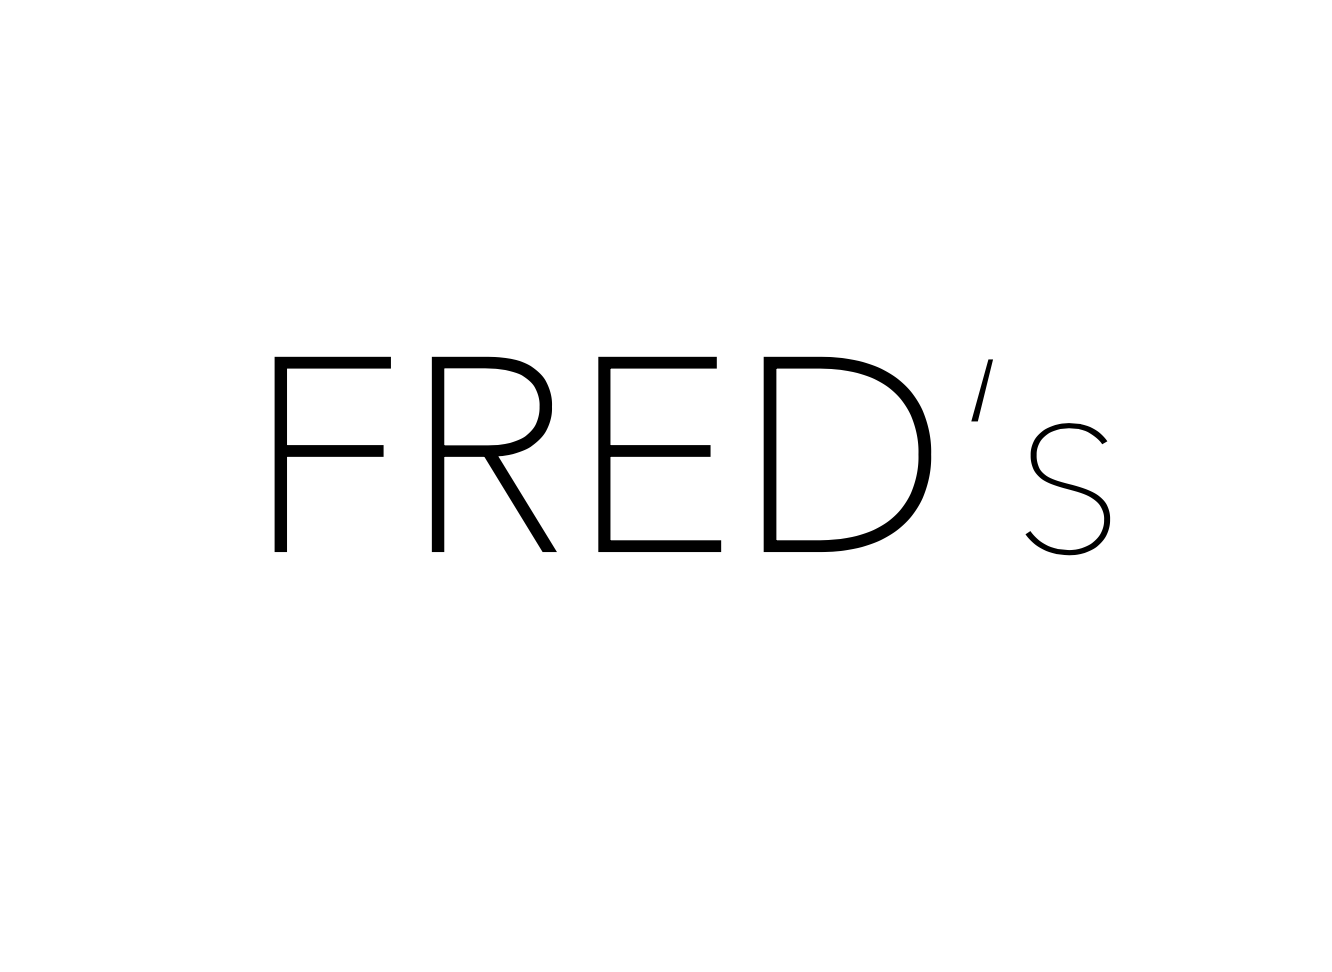 FRED's Watches